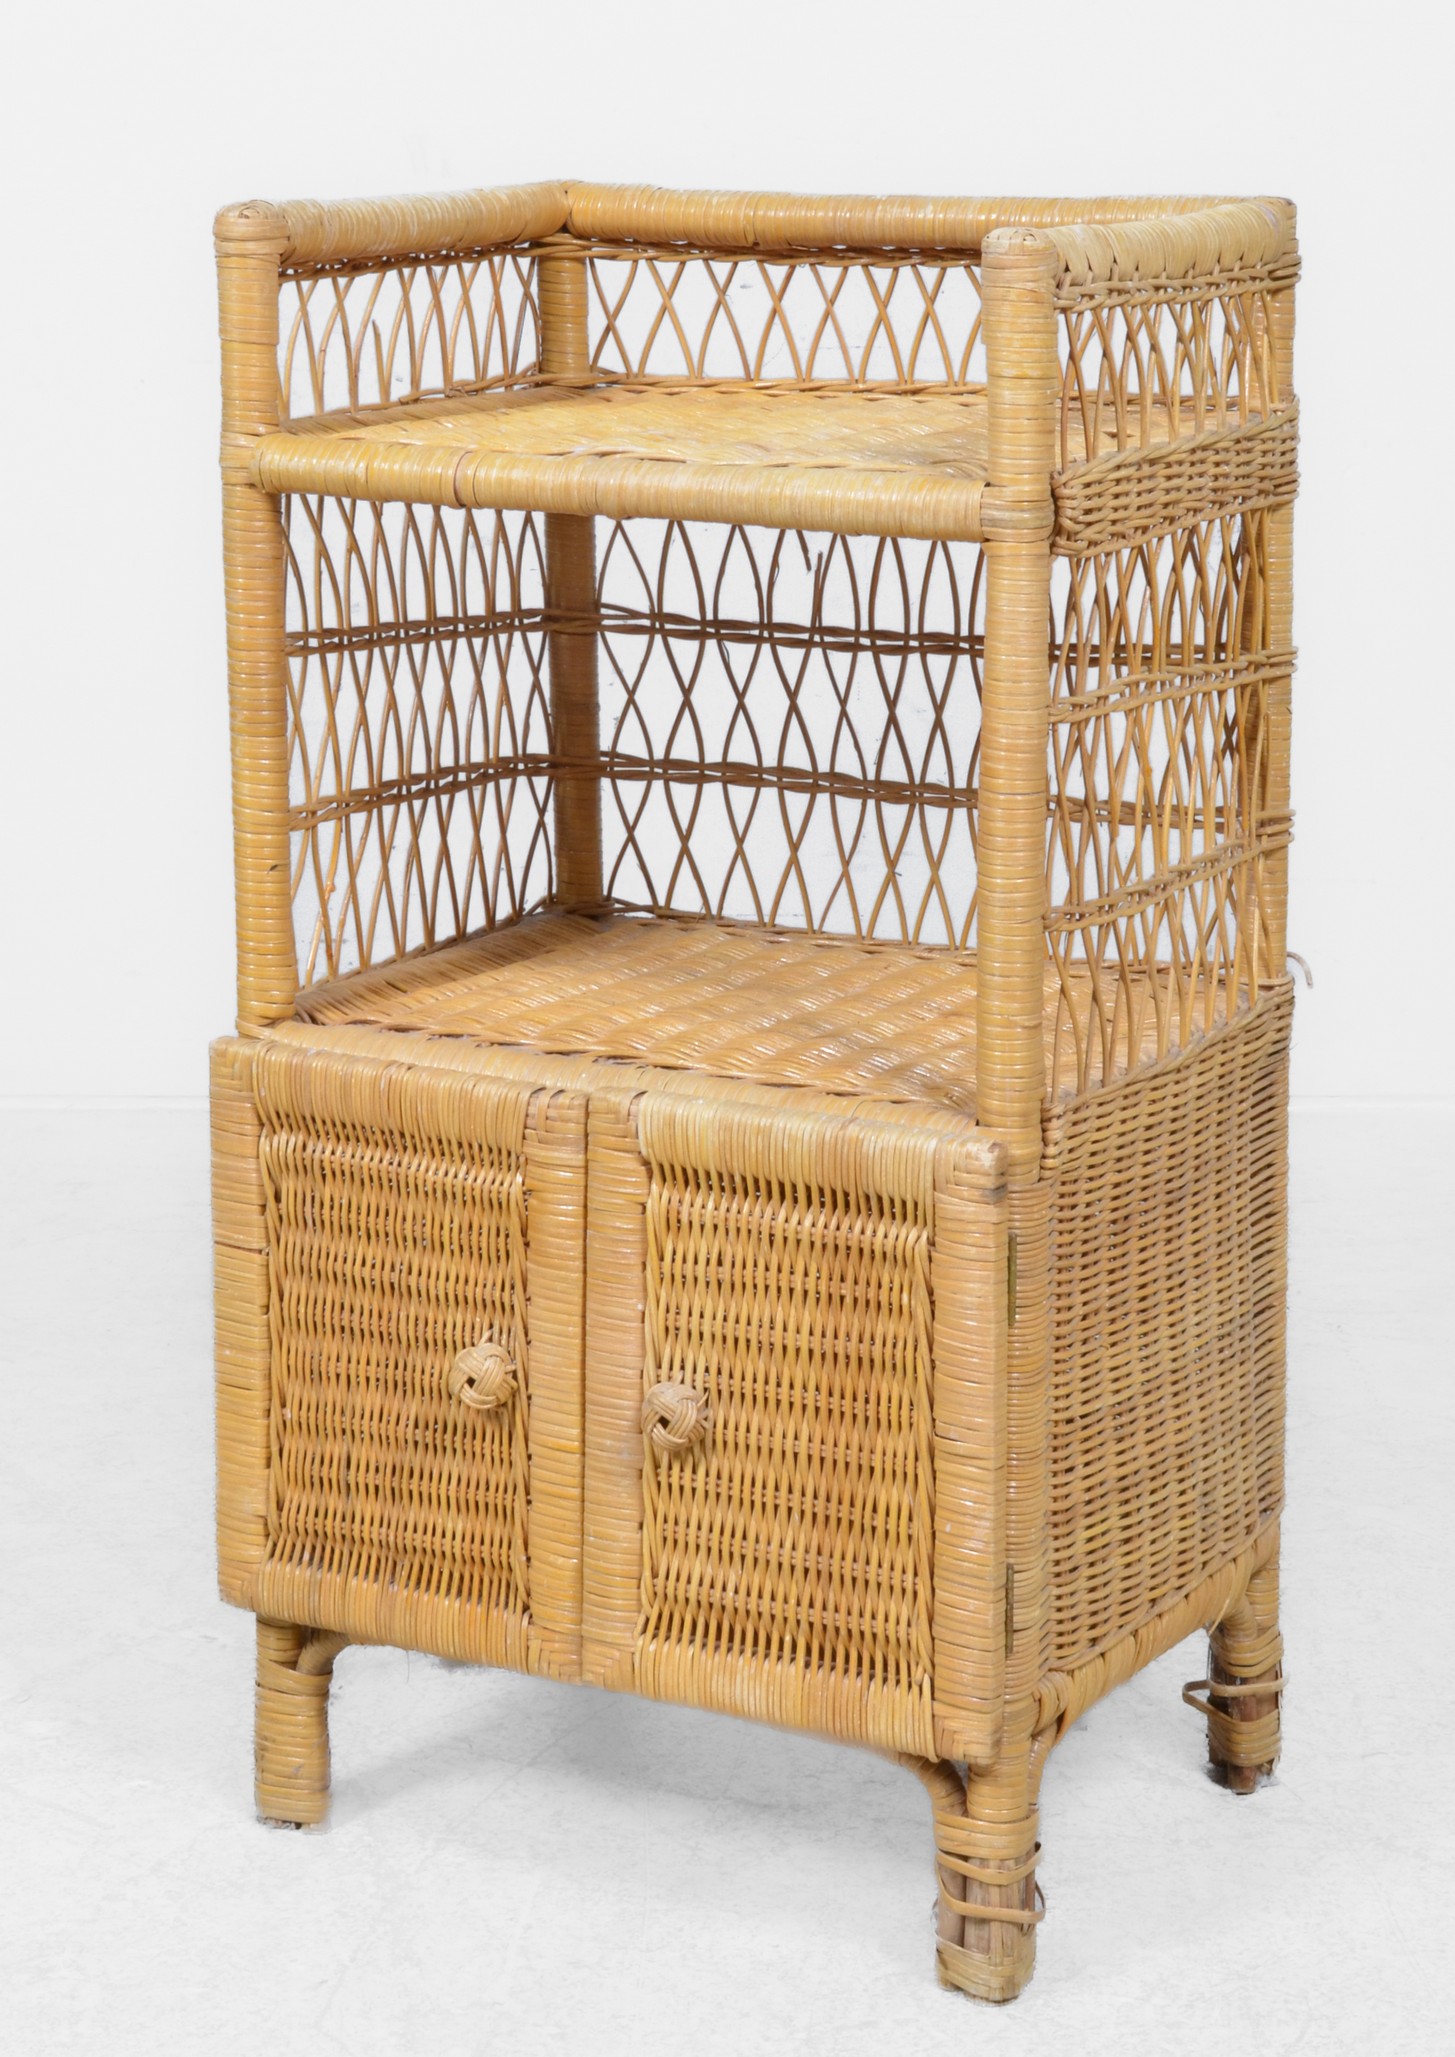 Wicker 2-tier stand, with lower